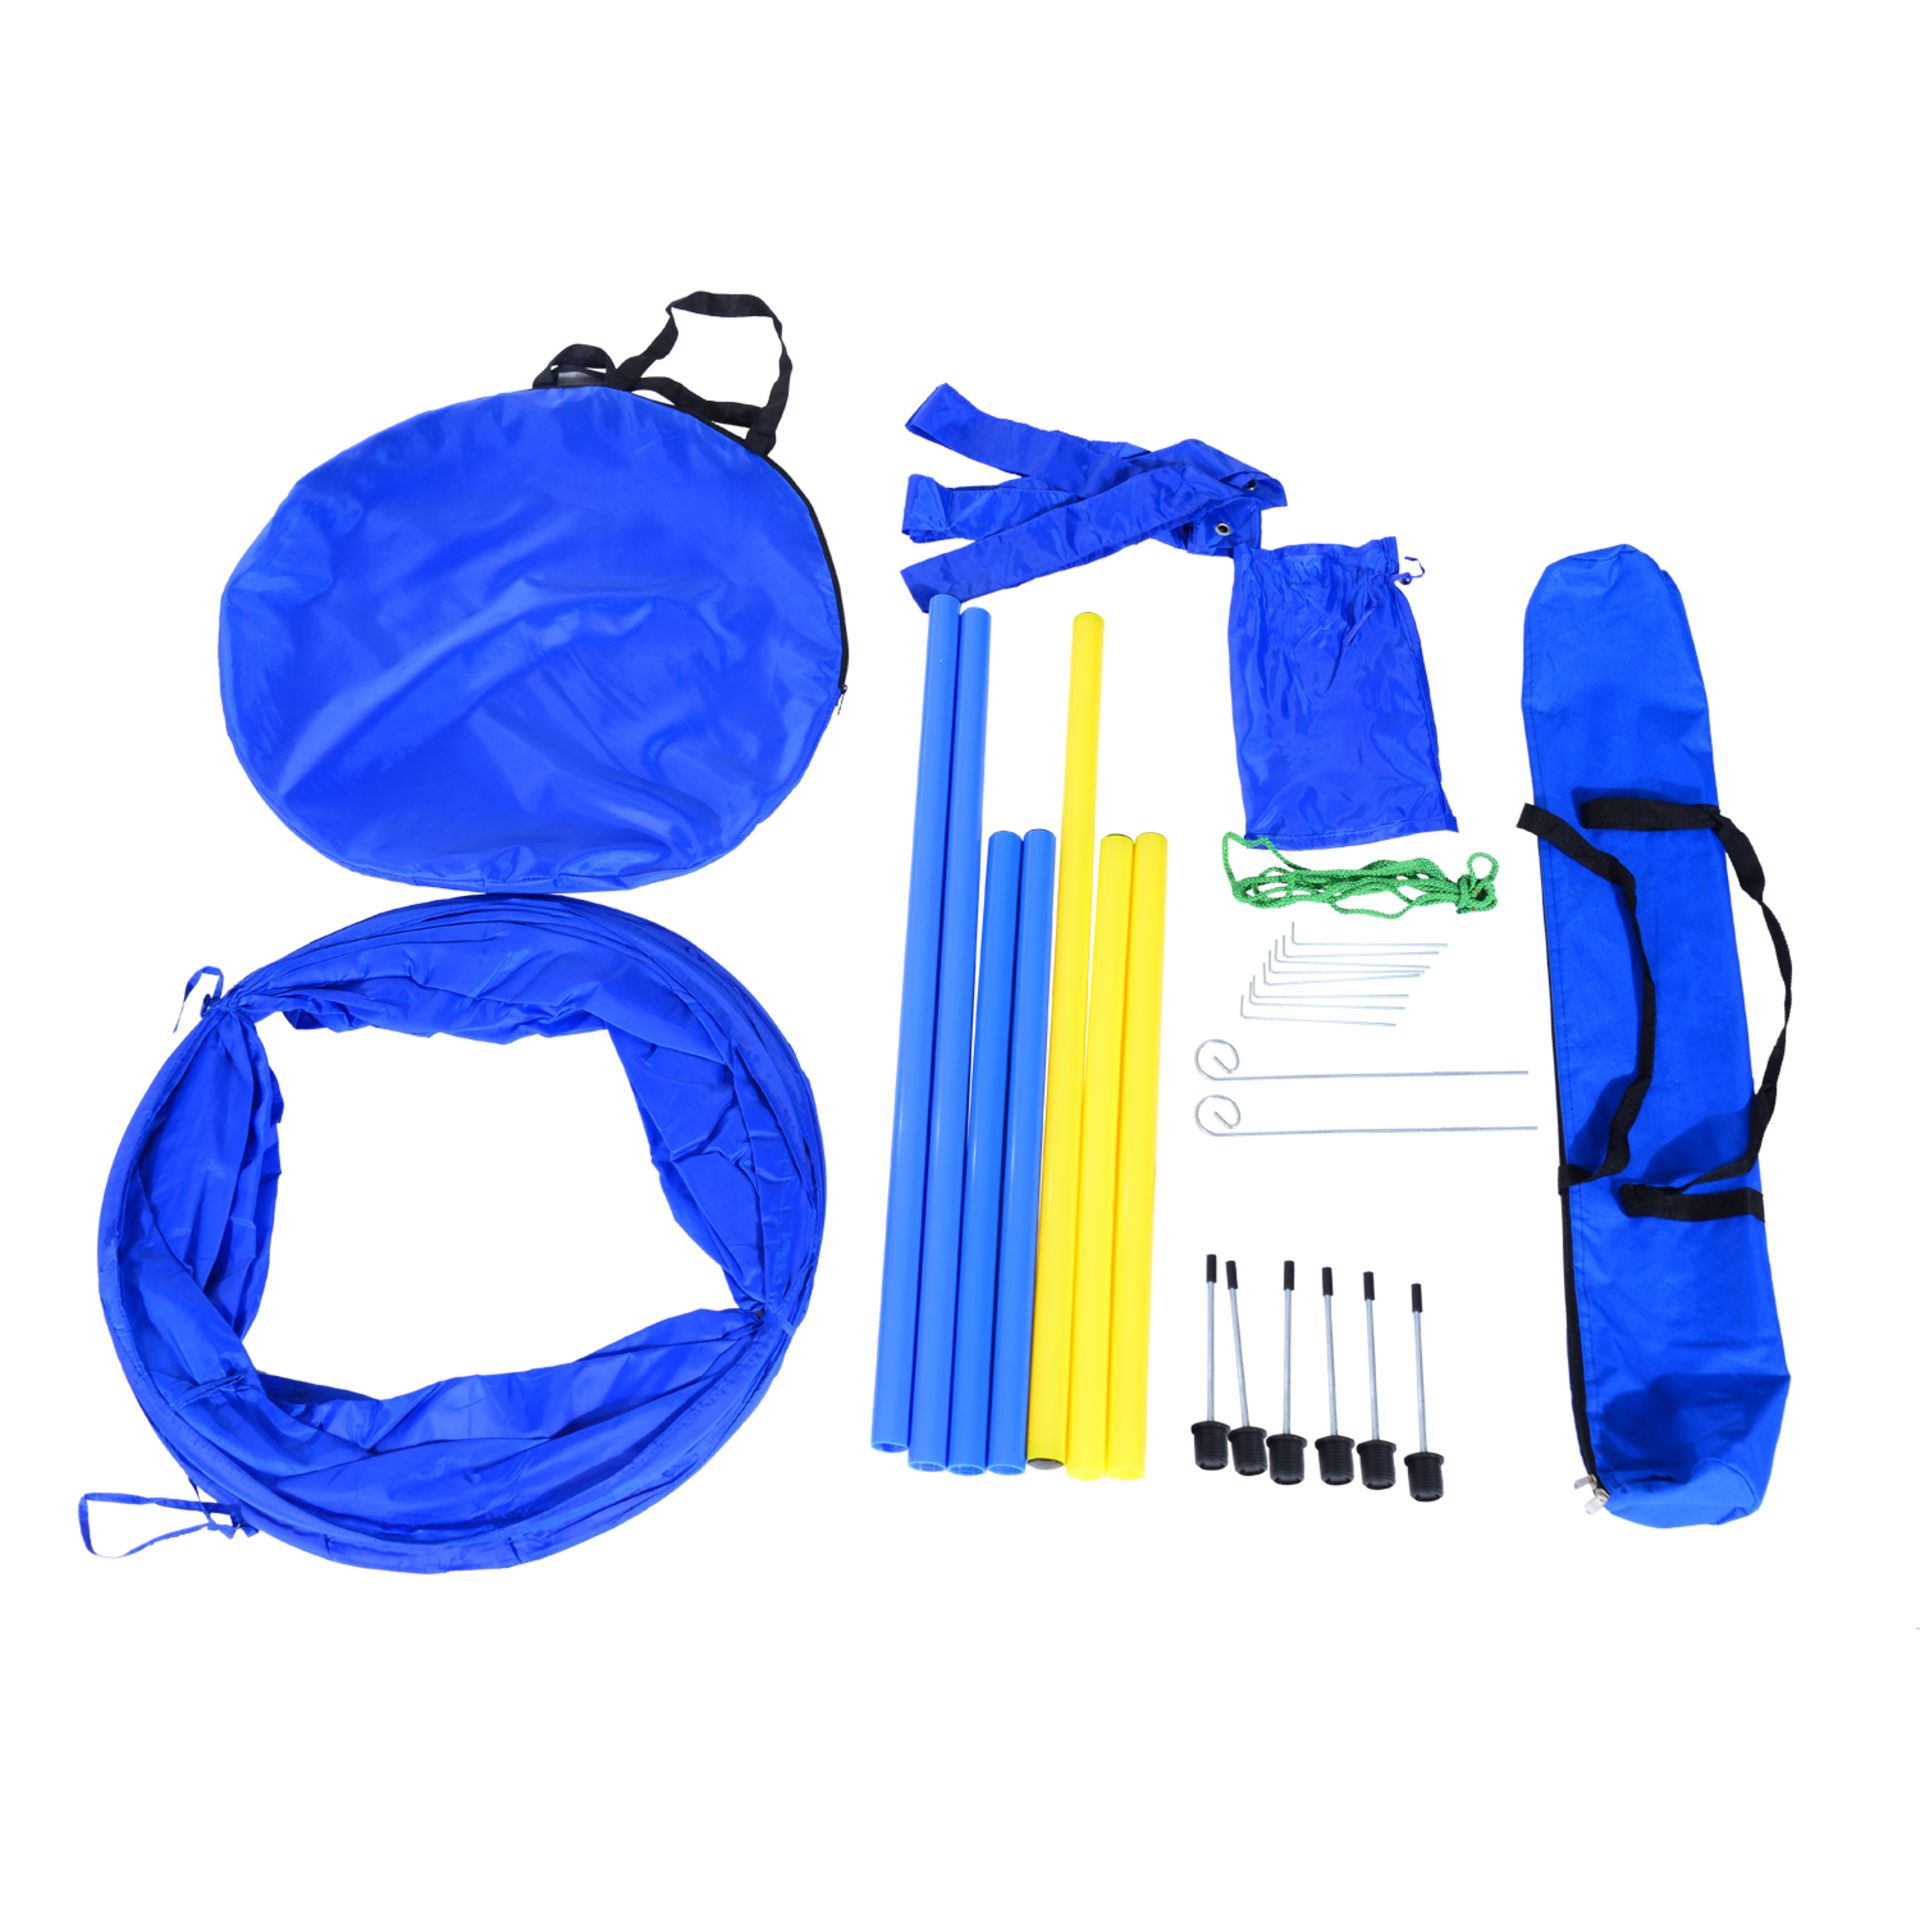 | 1X | PAWHUT ADJUSTABLE PET AGILITY TRAINING SET D07-003 | UNCHECKED AND BOXED | RRP £89.99 |